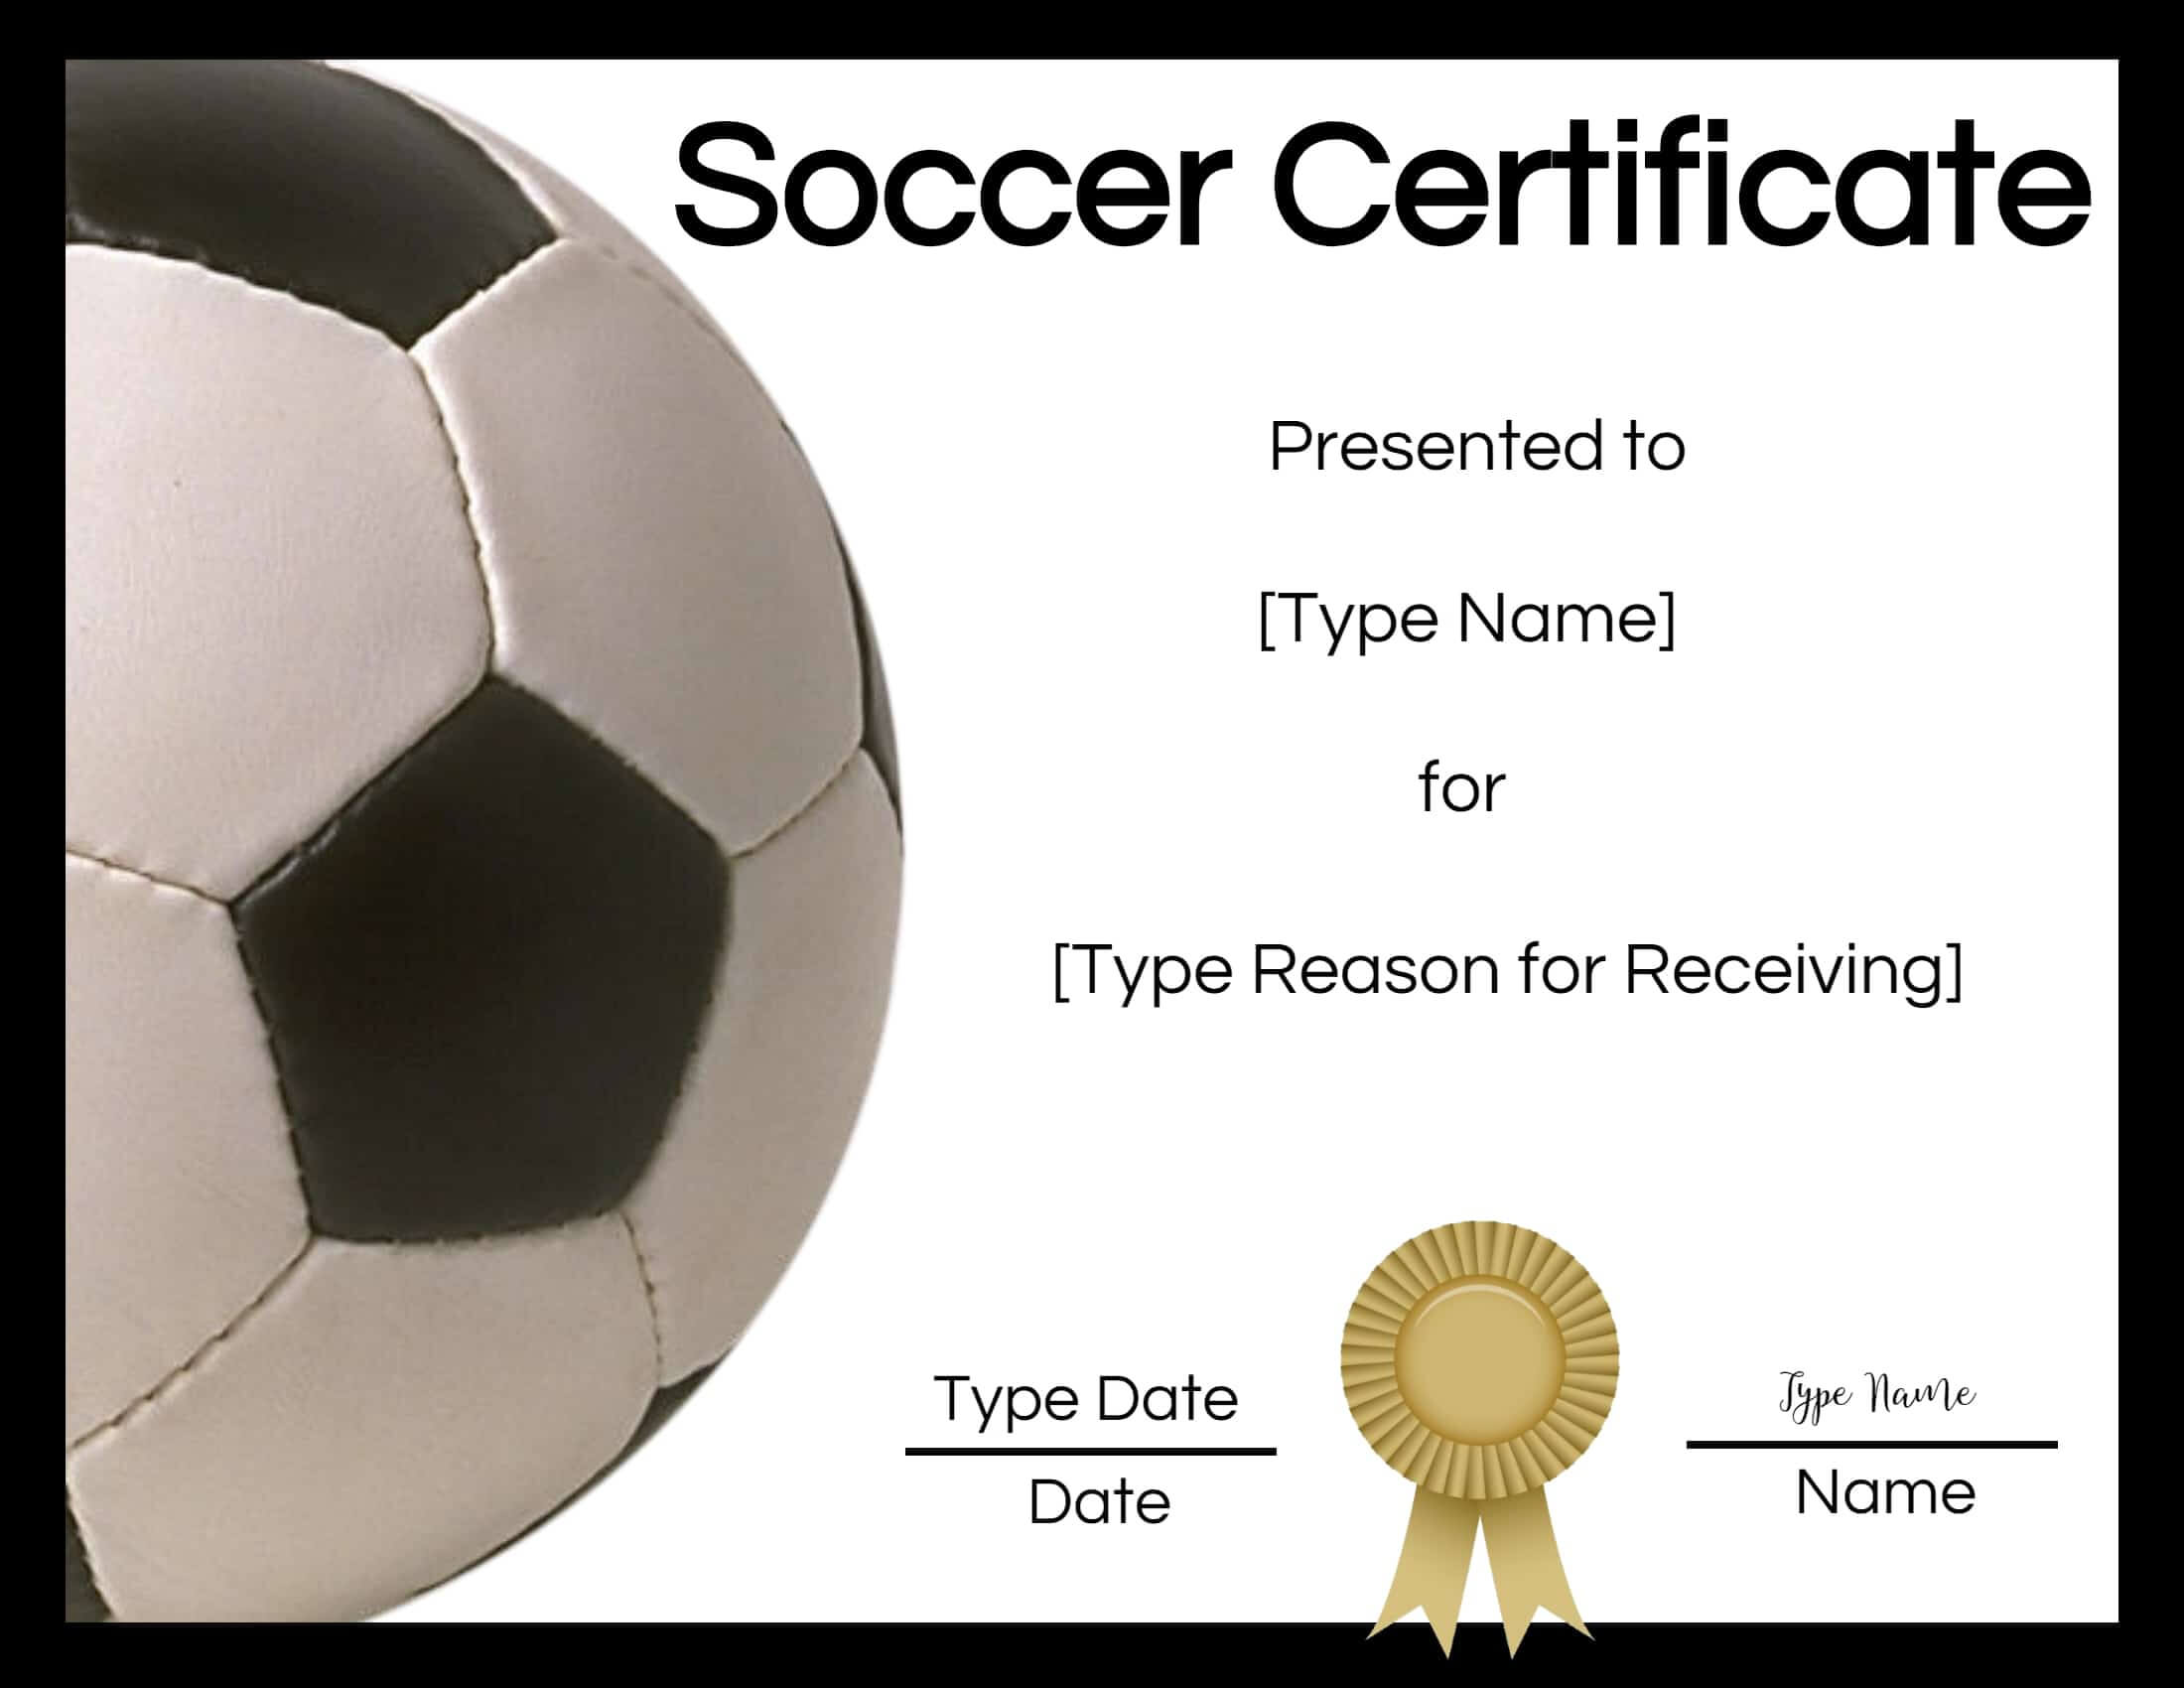 Free Soccer Certificate Maker | Edit Online And Print At Home Inside Soccer Certificate Template